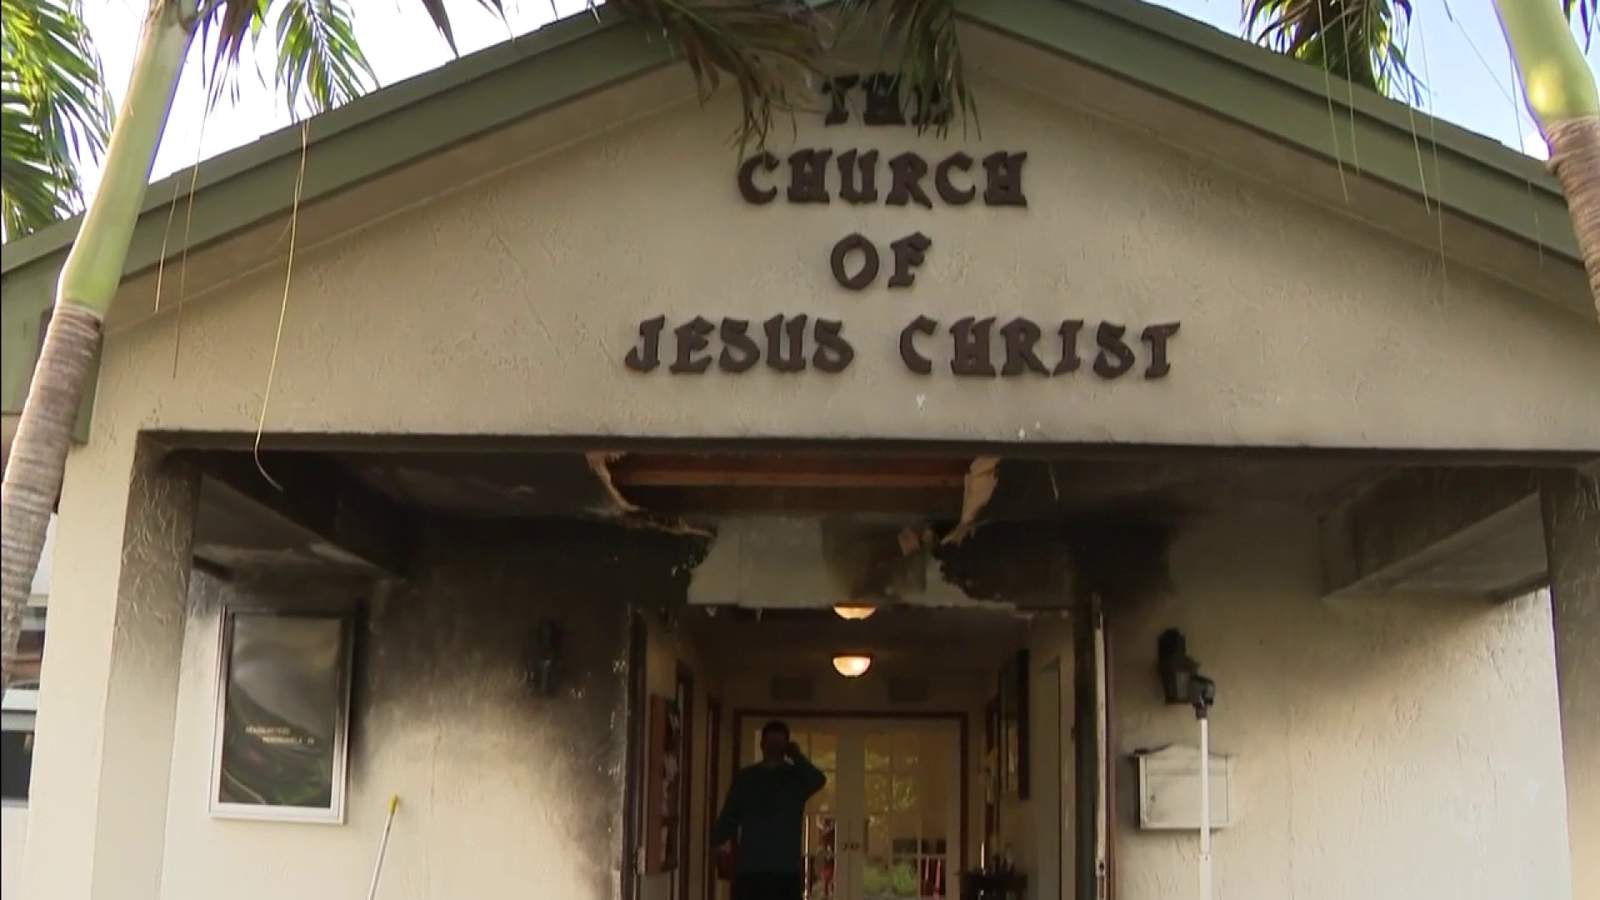 Hollywood pastor believes church fire was intentionally set